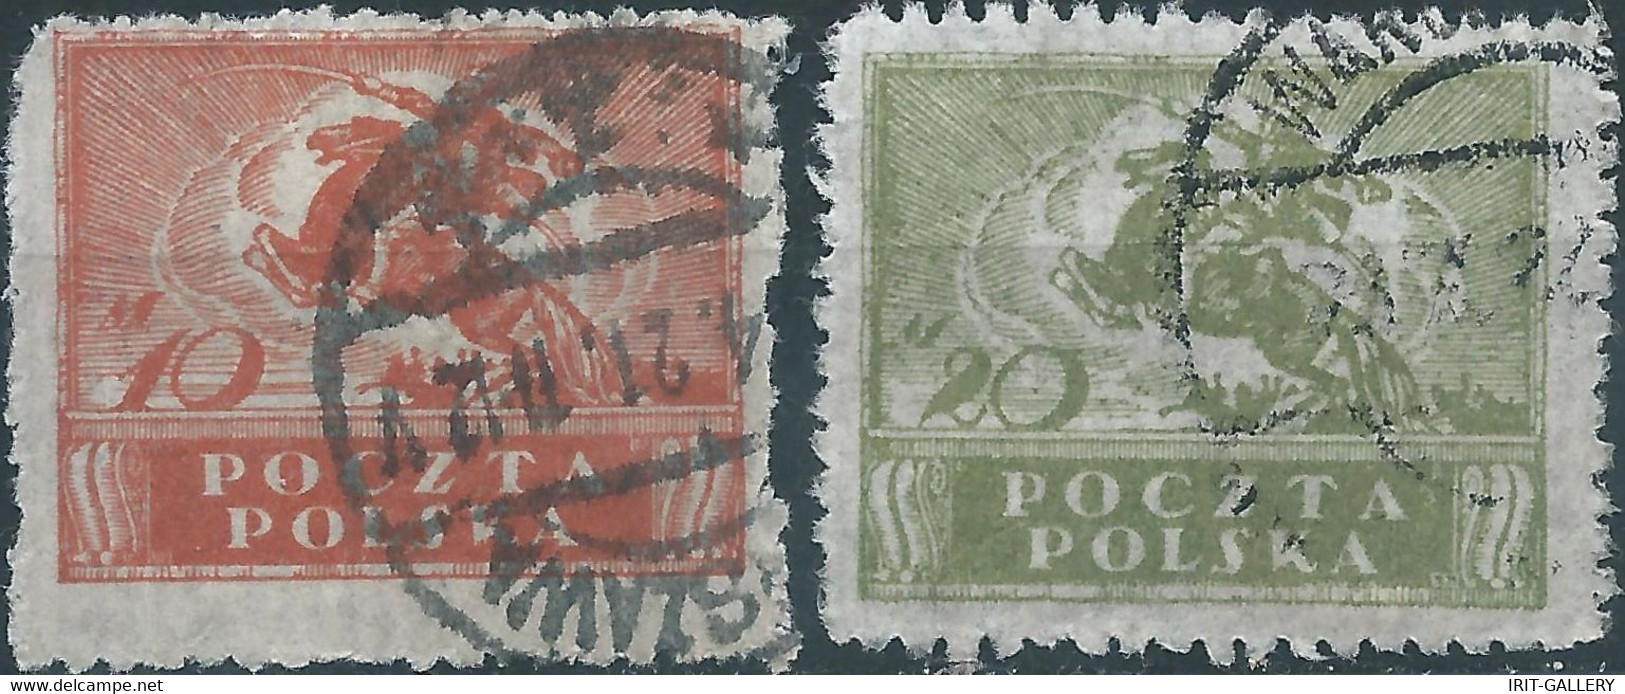 POLONIA-POLAND-POLSKA,1919 South And North Poland Issues -10M & 20M ,Obliterated - Gebruikt